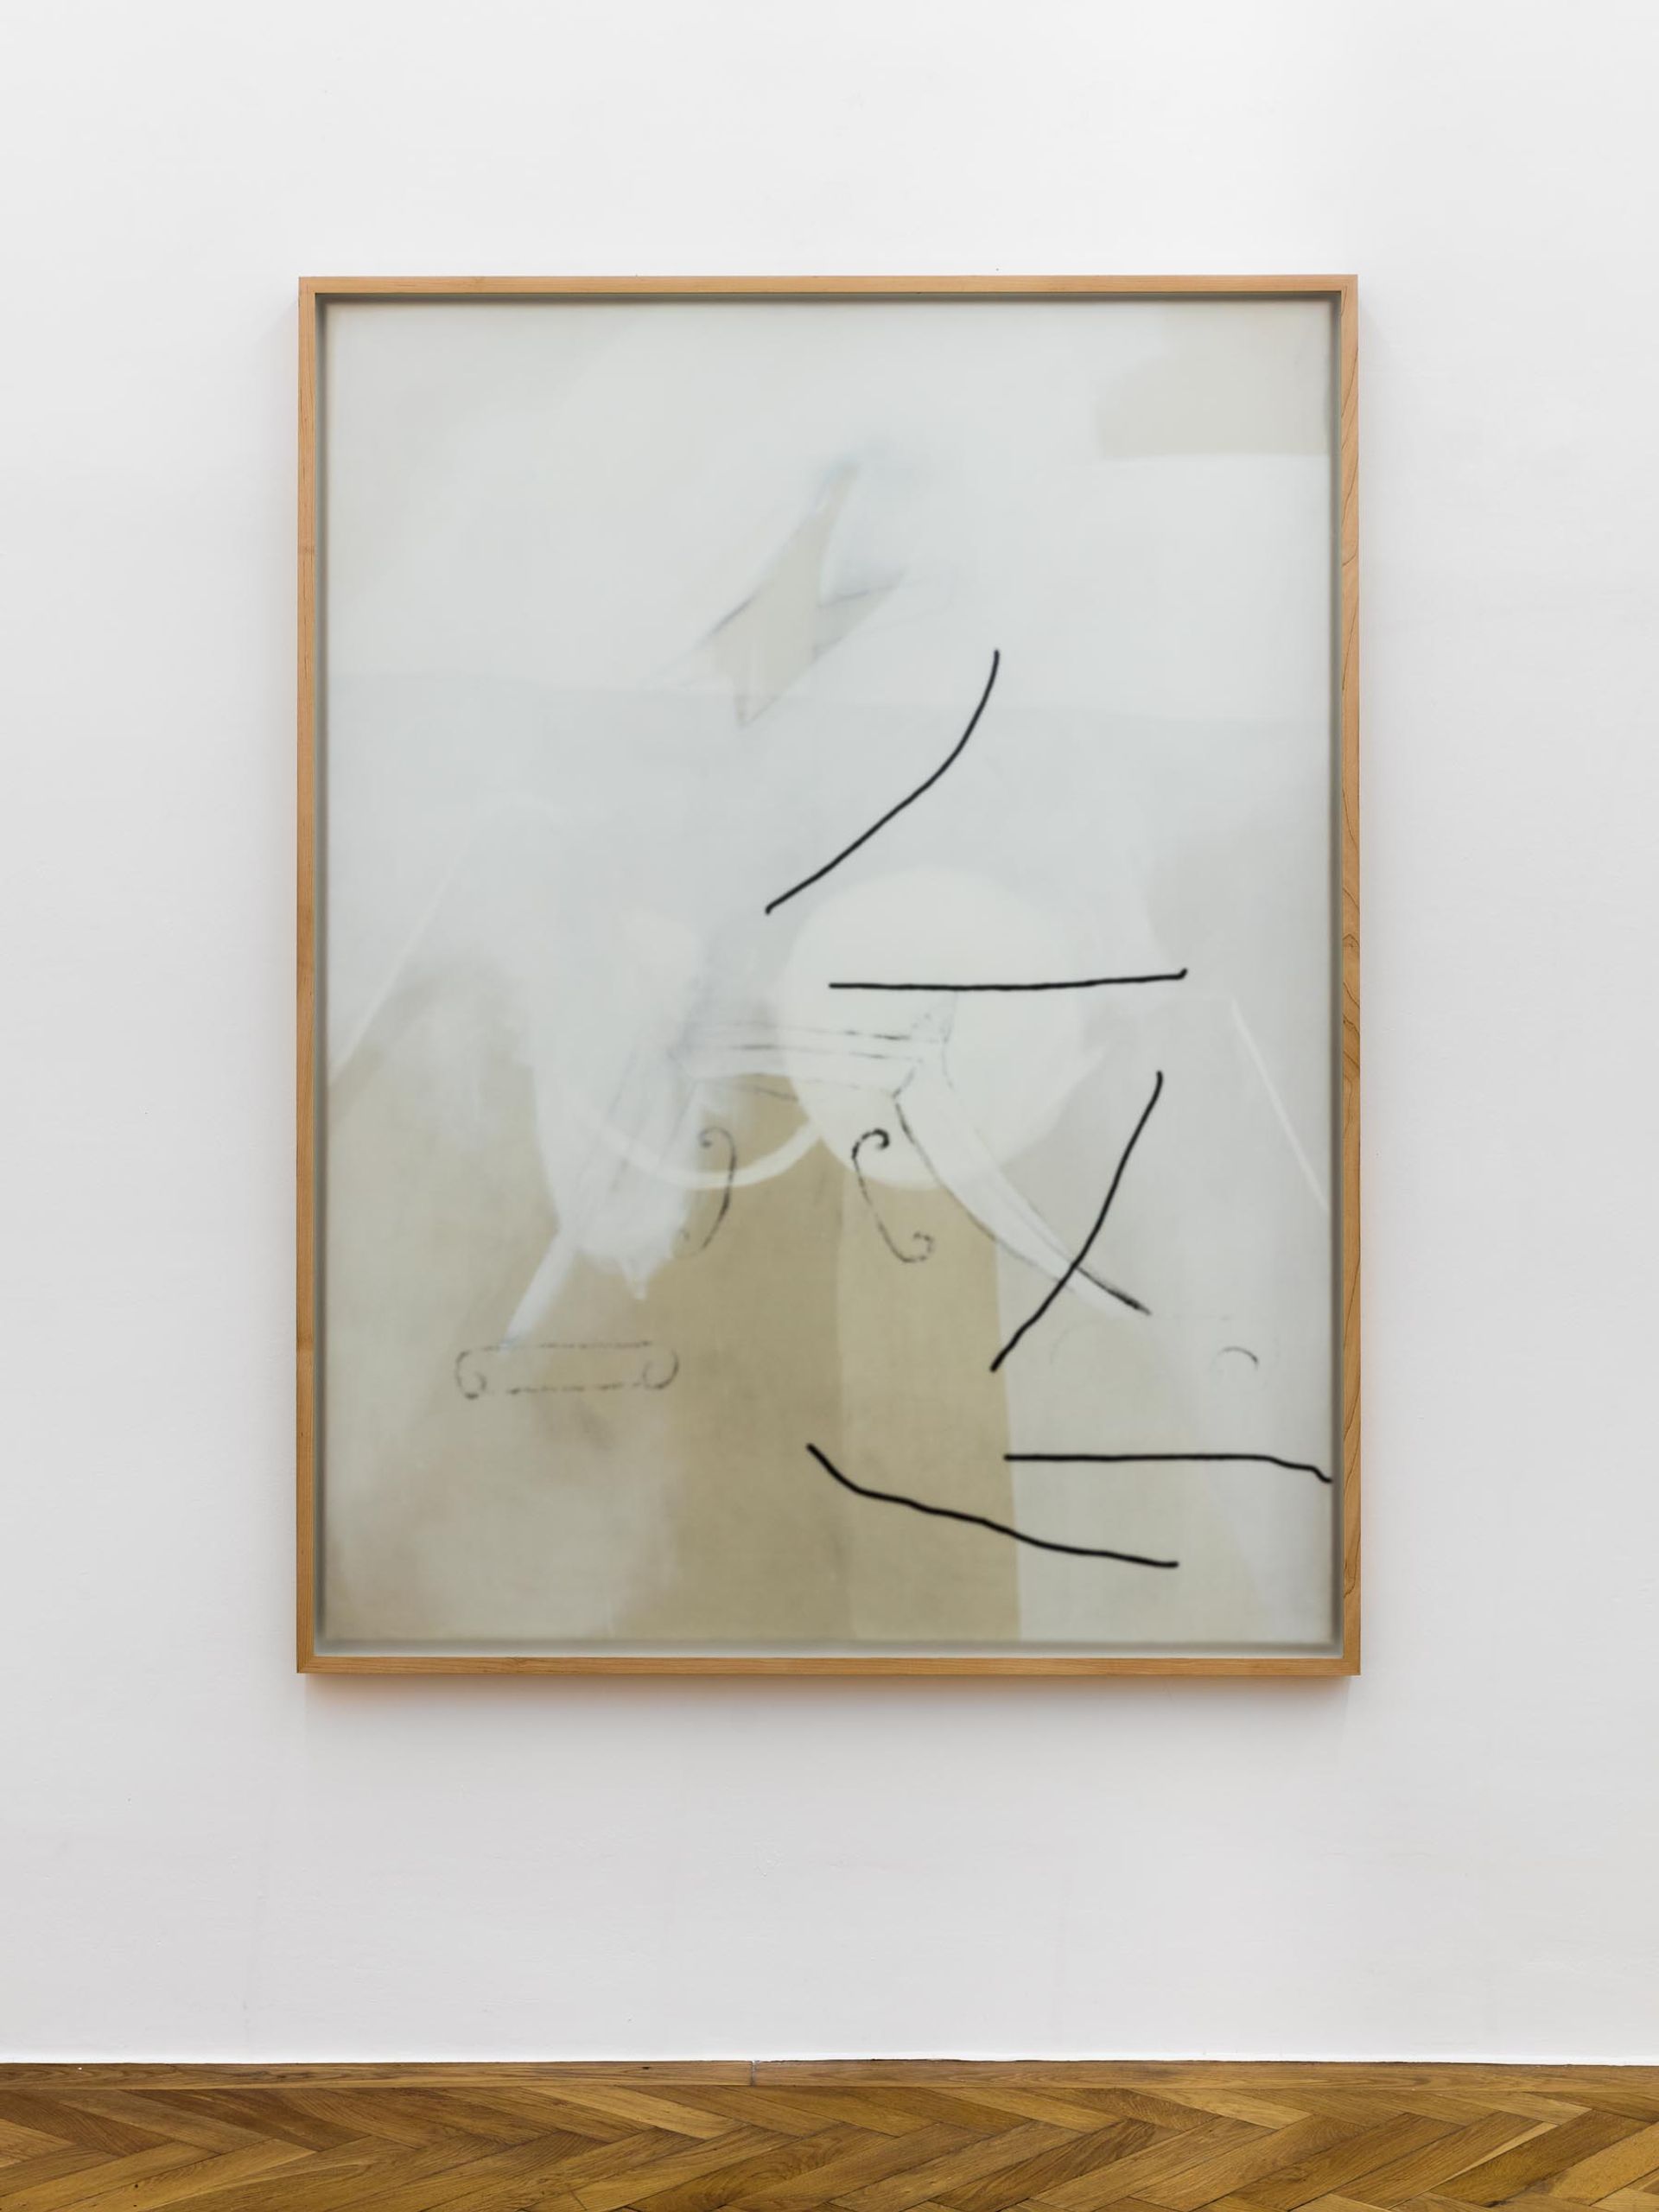 Malte Zenses, Orgelblut II, 2019, oil and pencil on canvas, opal glass and maple wood, 126.5 × 166 cm